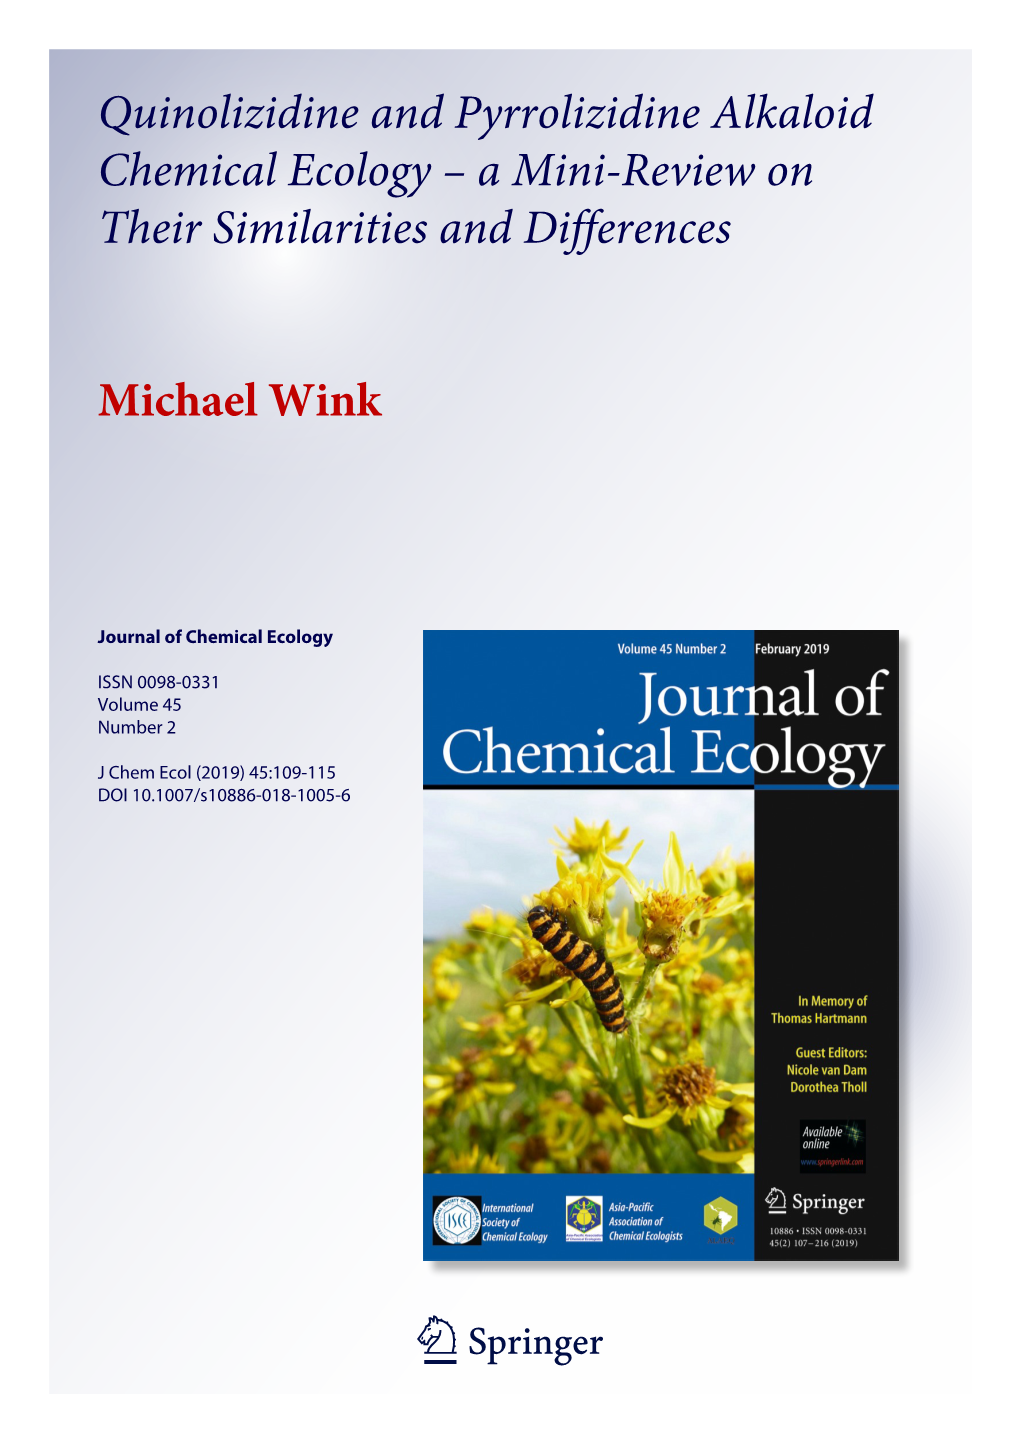 Quinolizidine and Pyrrolizidine Alkaloid Chemical Ecology – a Mini-Review on Their Similarities and Differences